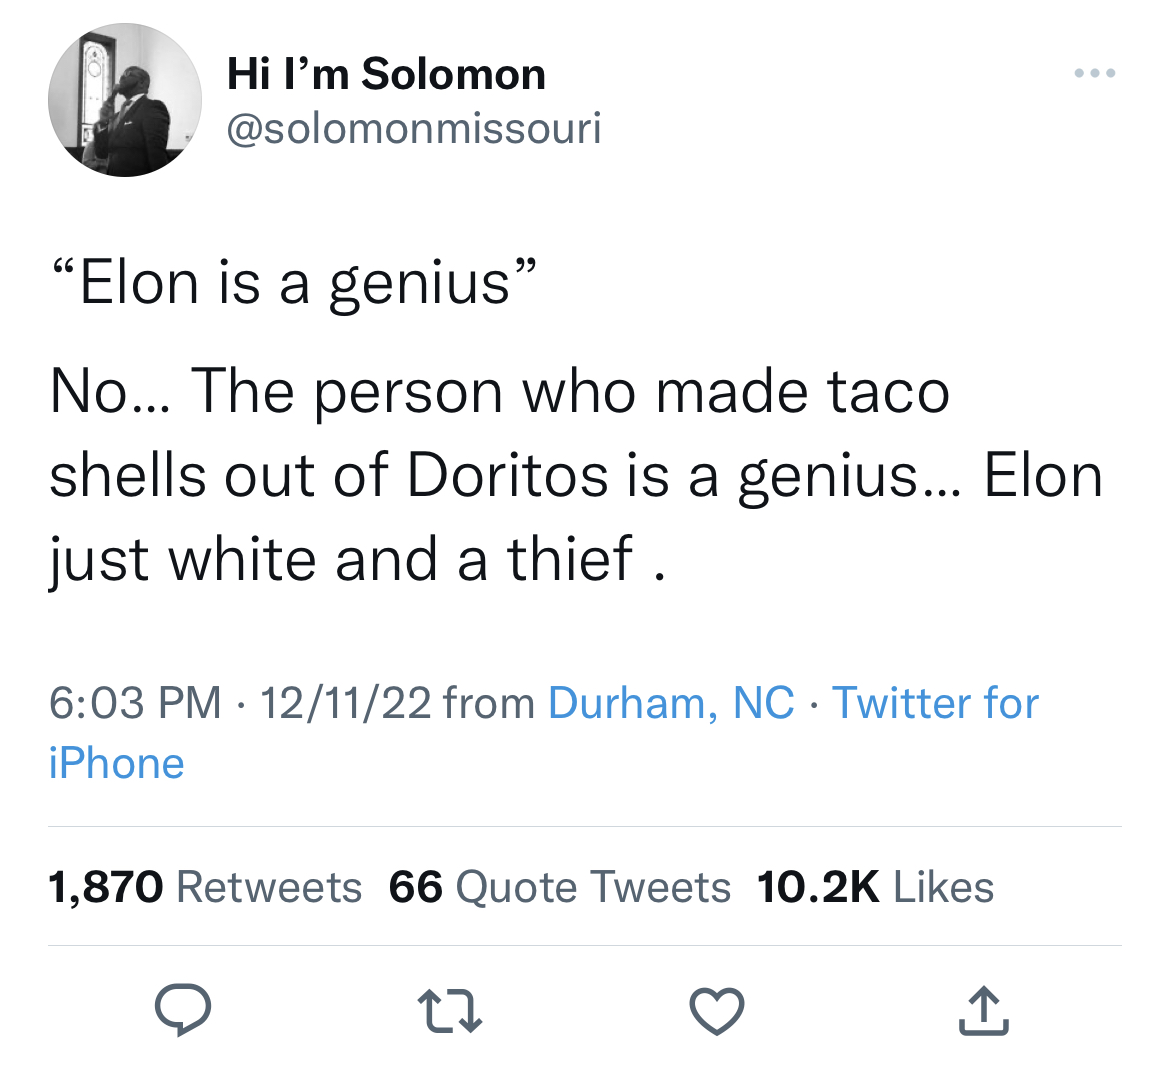 Tweets roasting celebs - angle - Hi I'm Solomon "Elon is a genius" No... The person who made taco shells out of Doritos is a genius... Elon just white and a thief. 121122 from Durham, Nc Twitter for iPhone 1,870 66 Quote Tweets 27